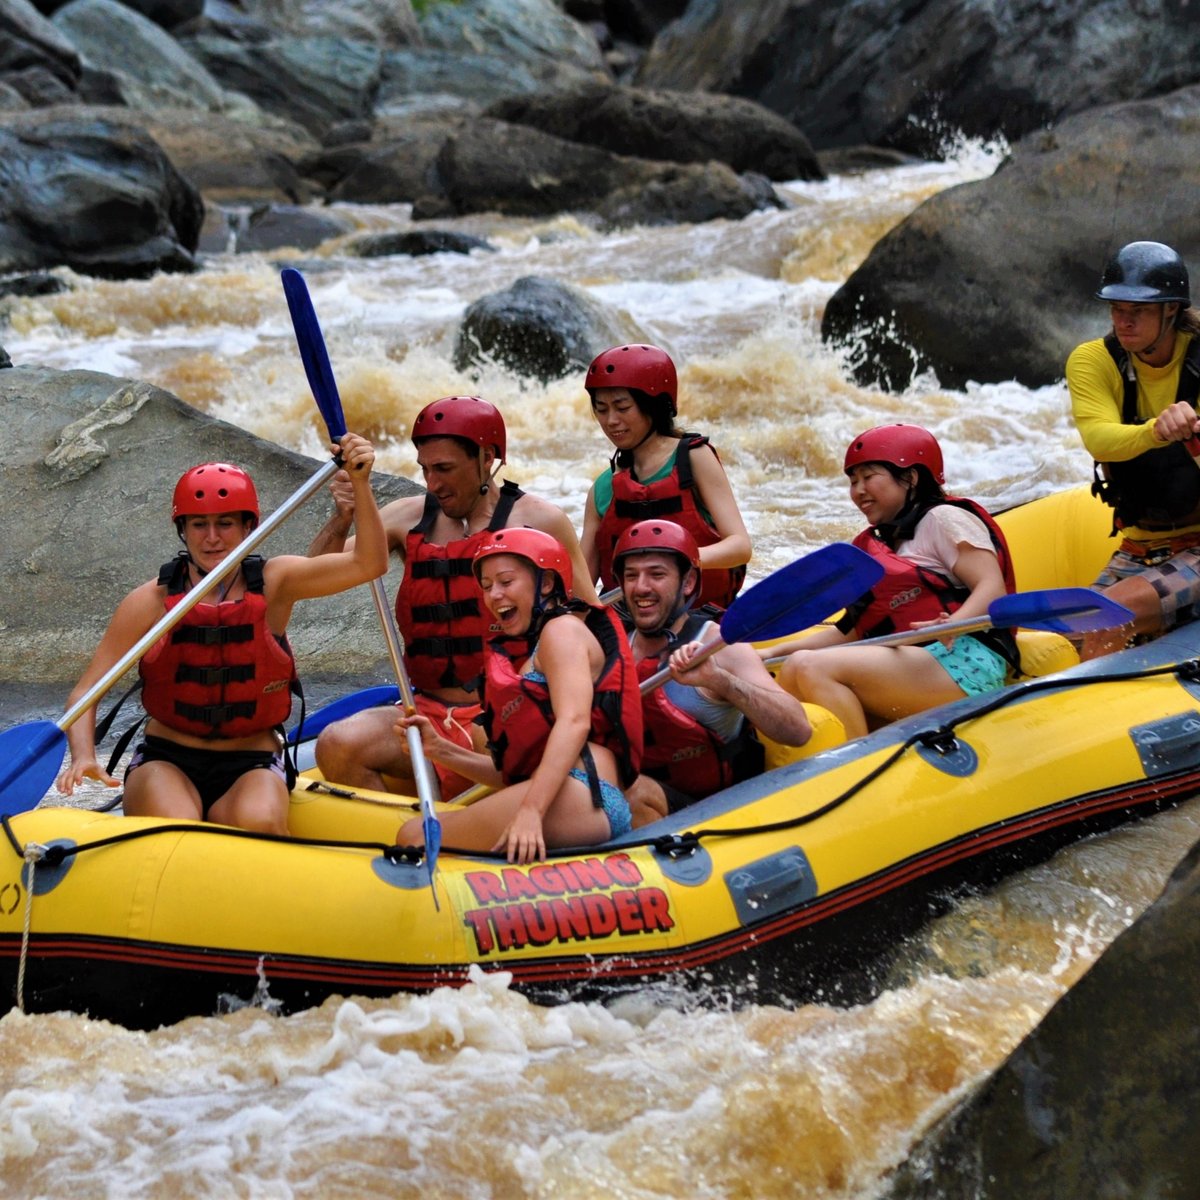 Cairns Adventure - Group with lifejackets and helmets on rubber raft